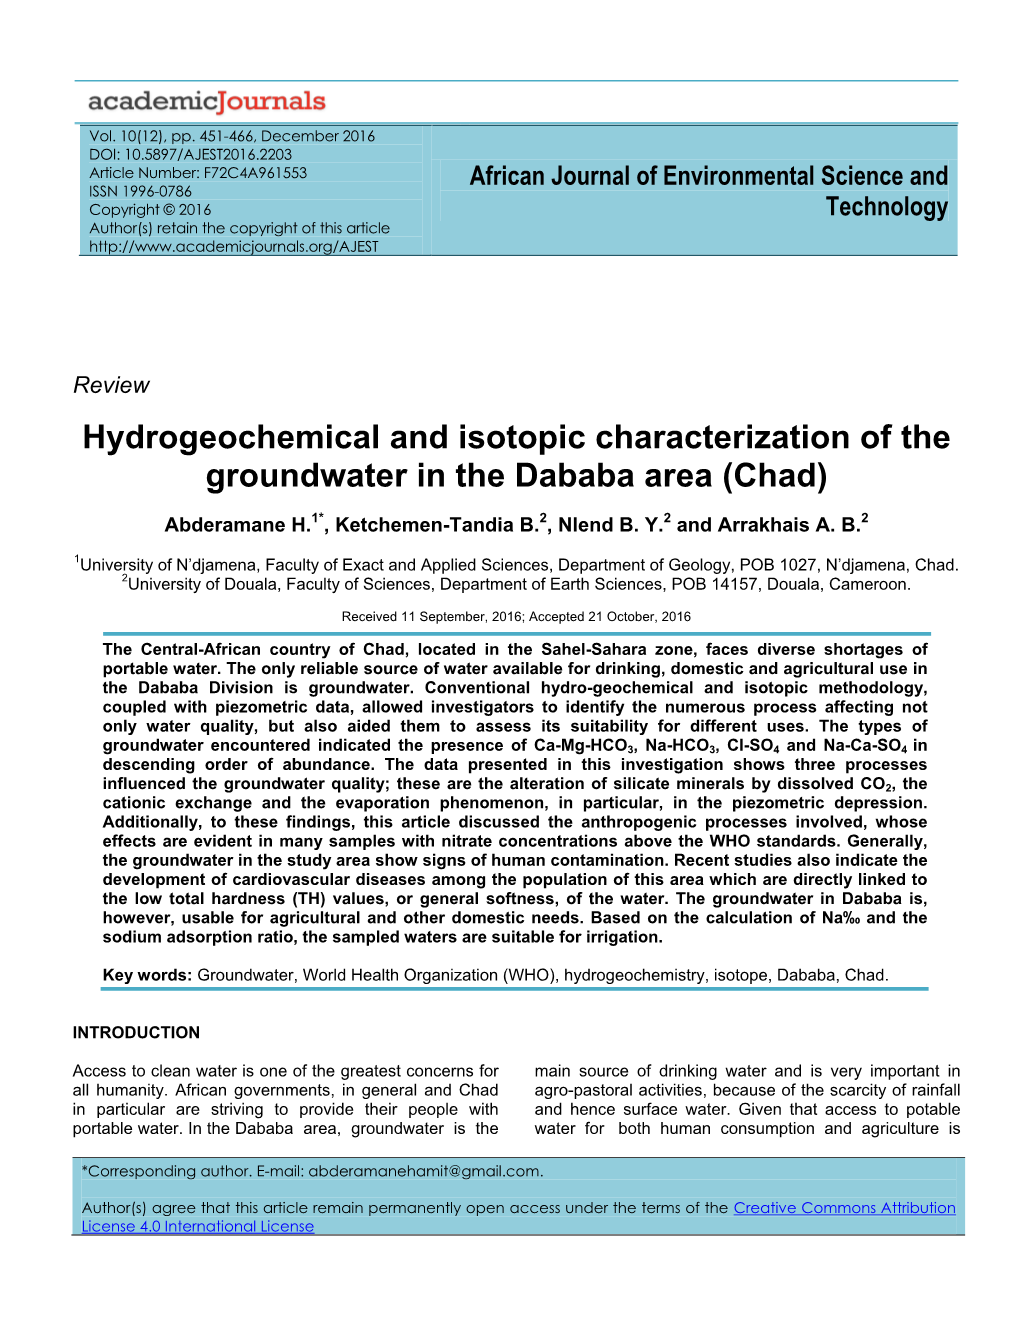 Hydrogeochemical and Isotopic Characterization of the Groundwater in the Dababa Area (Chad)